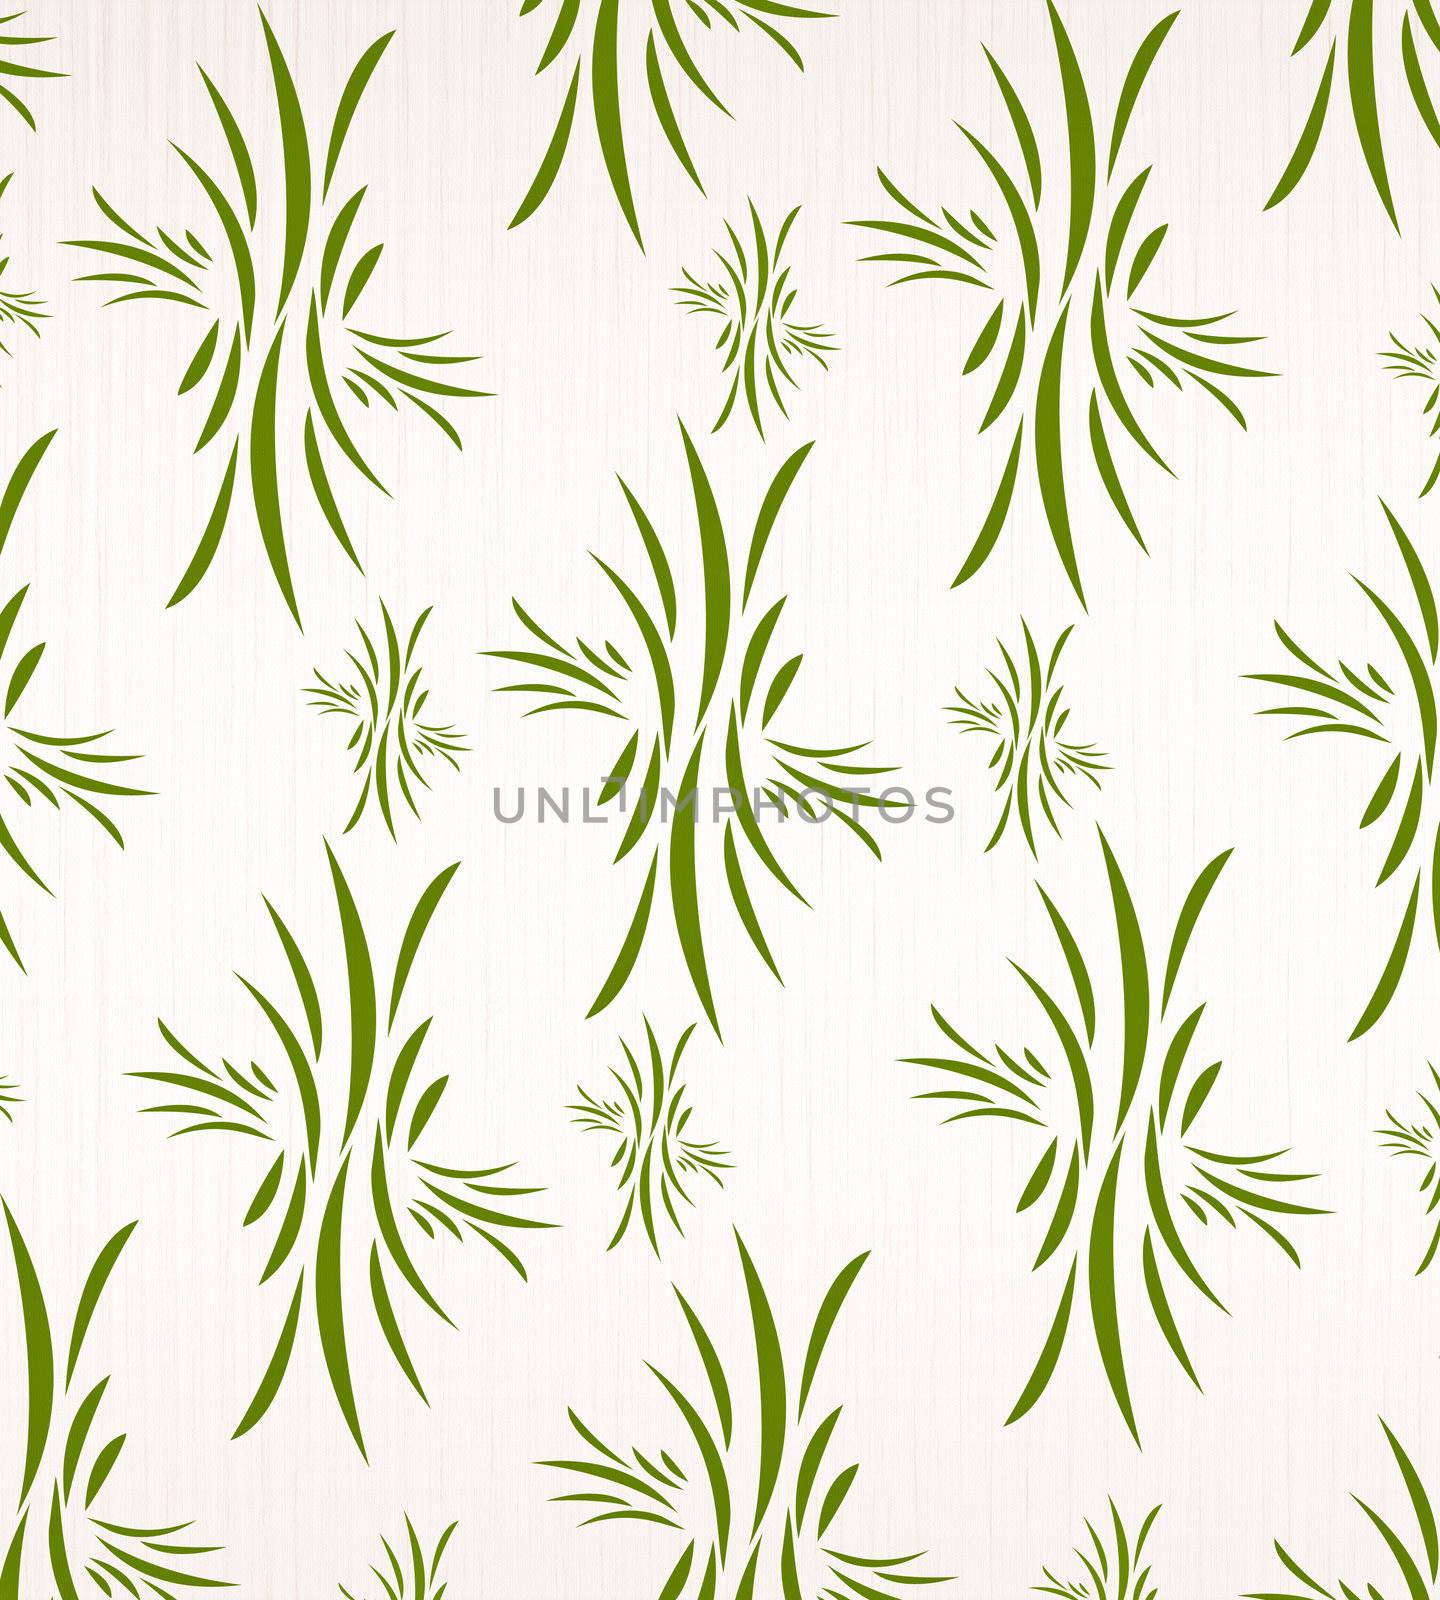 Floral wallpaper on white fabric by silent47